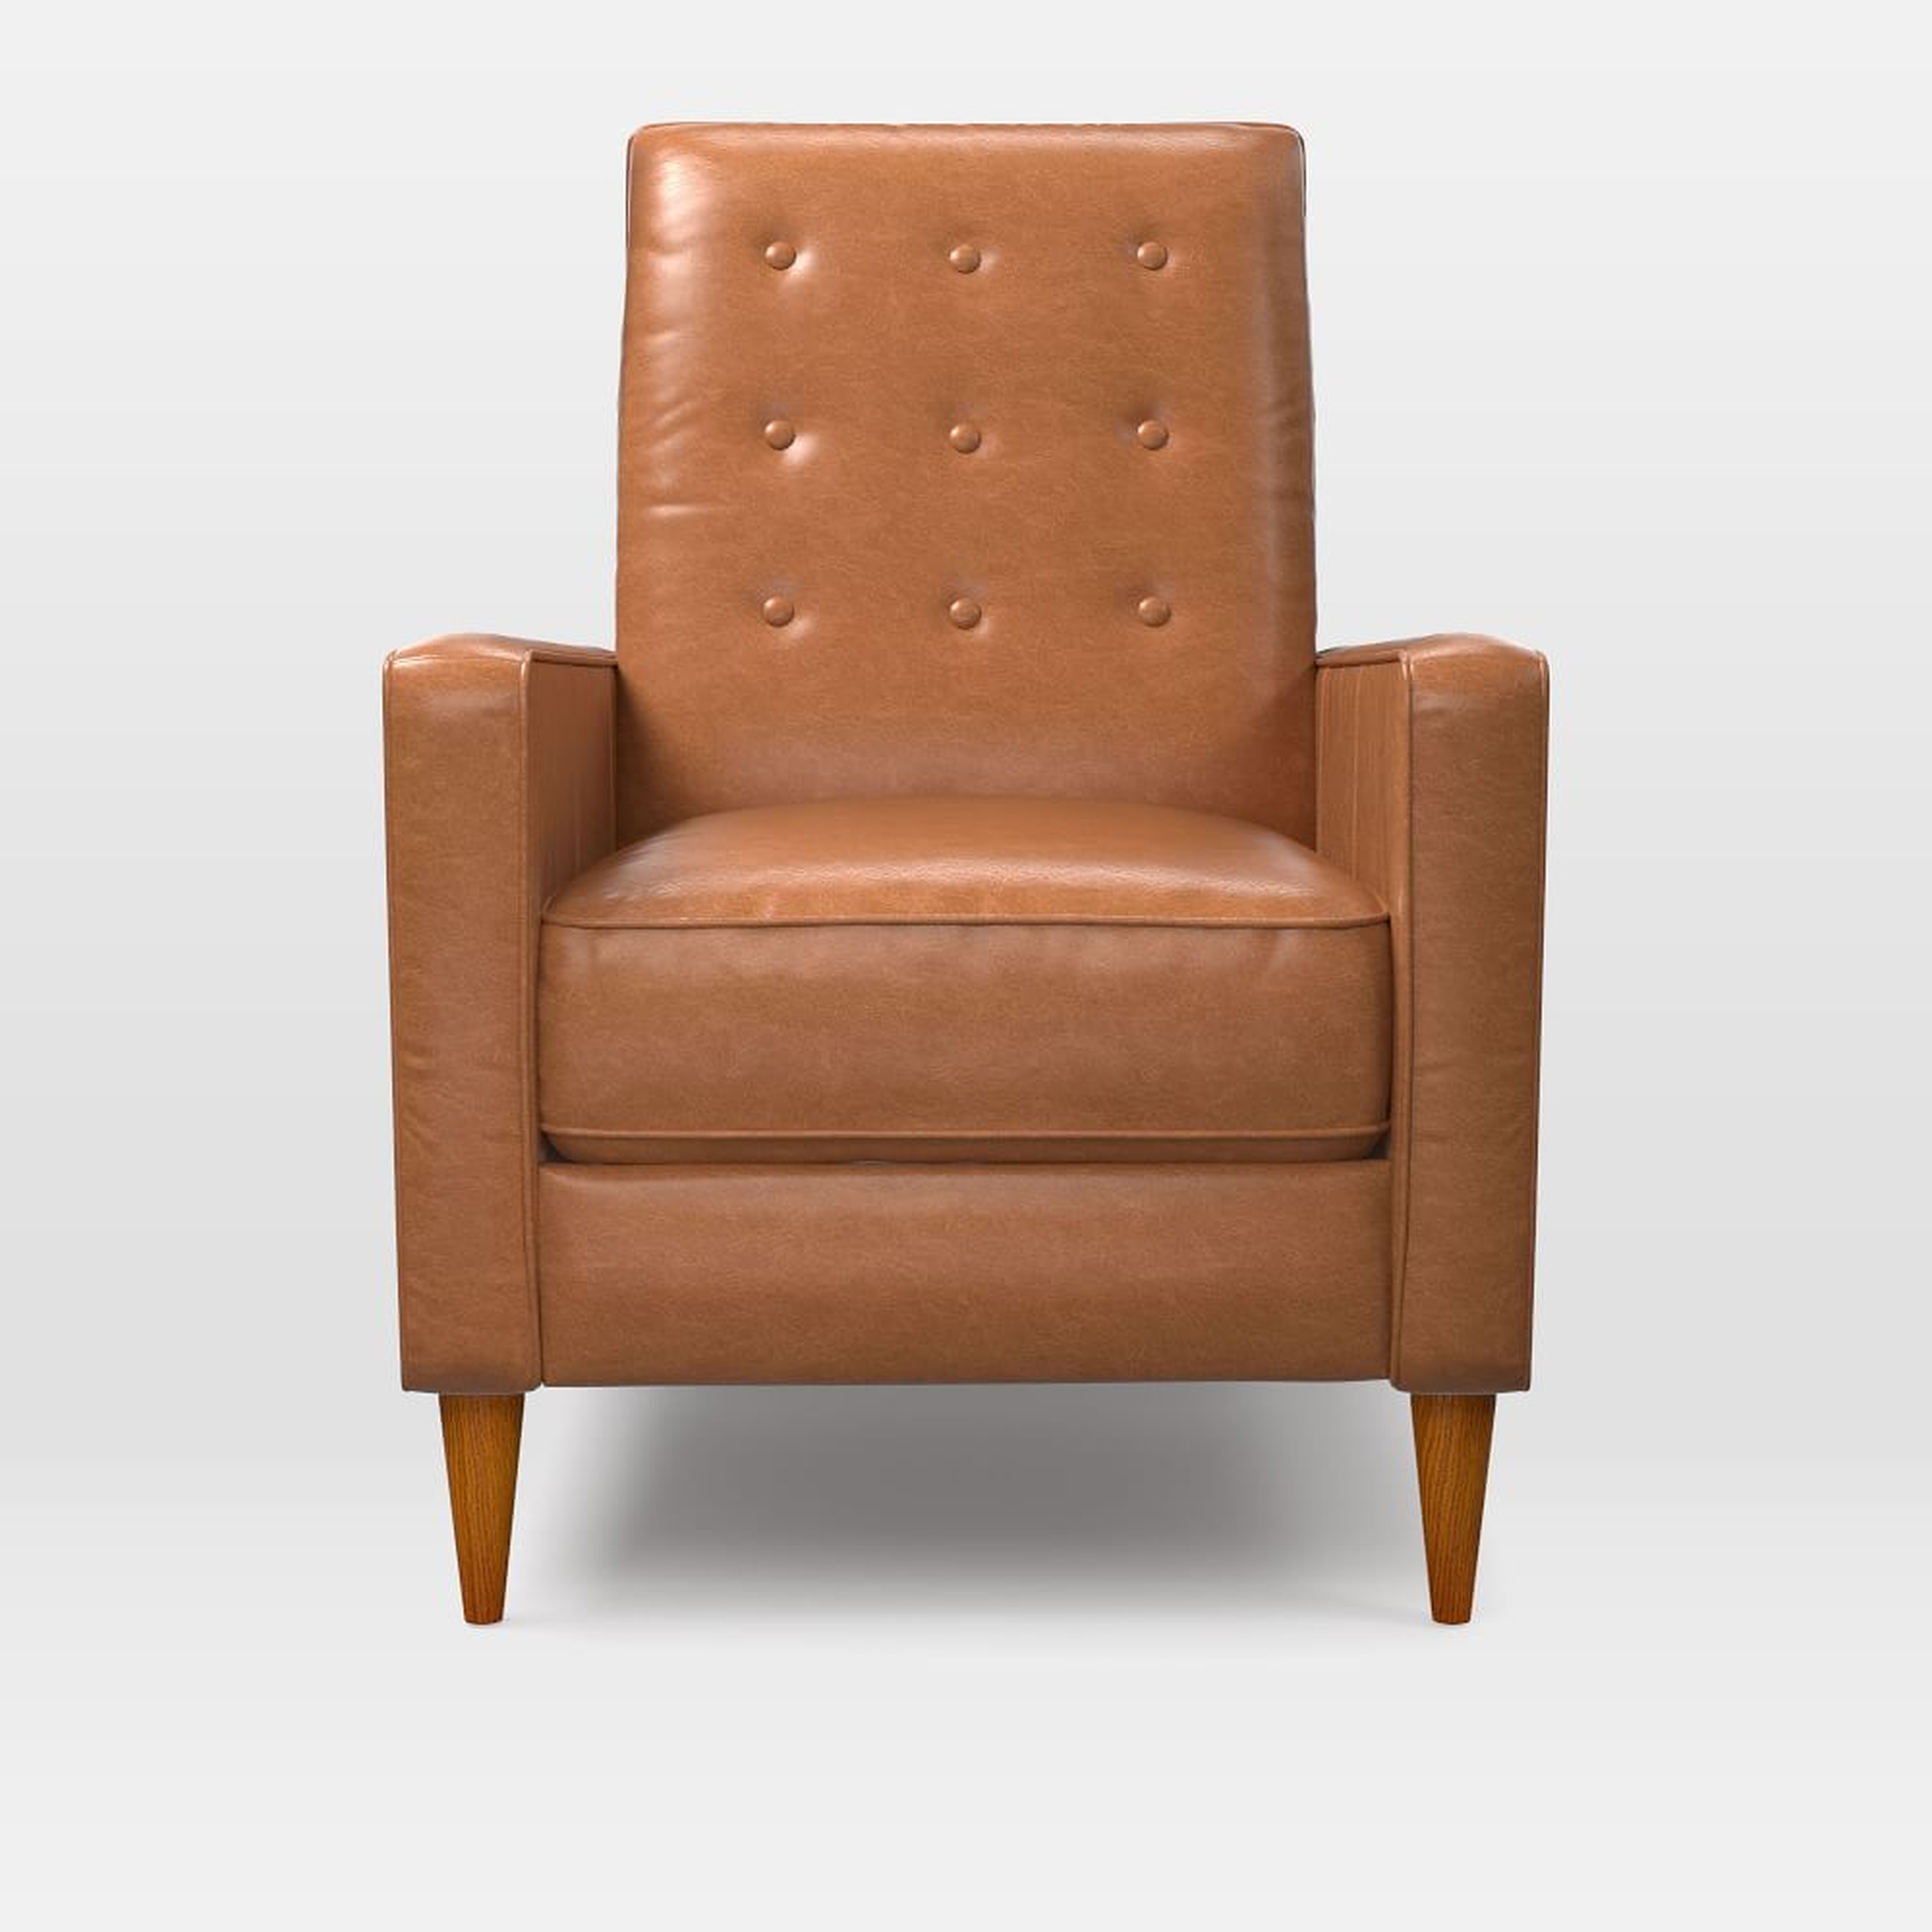 Rhys Midcentury Recliner, Poly, Saddle Leather, Nut, Pecan - West Elm